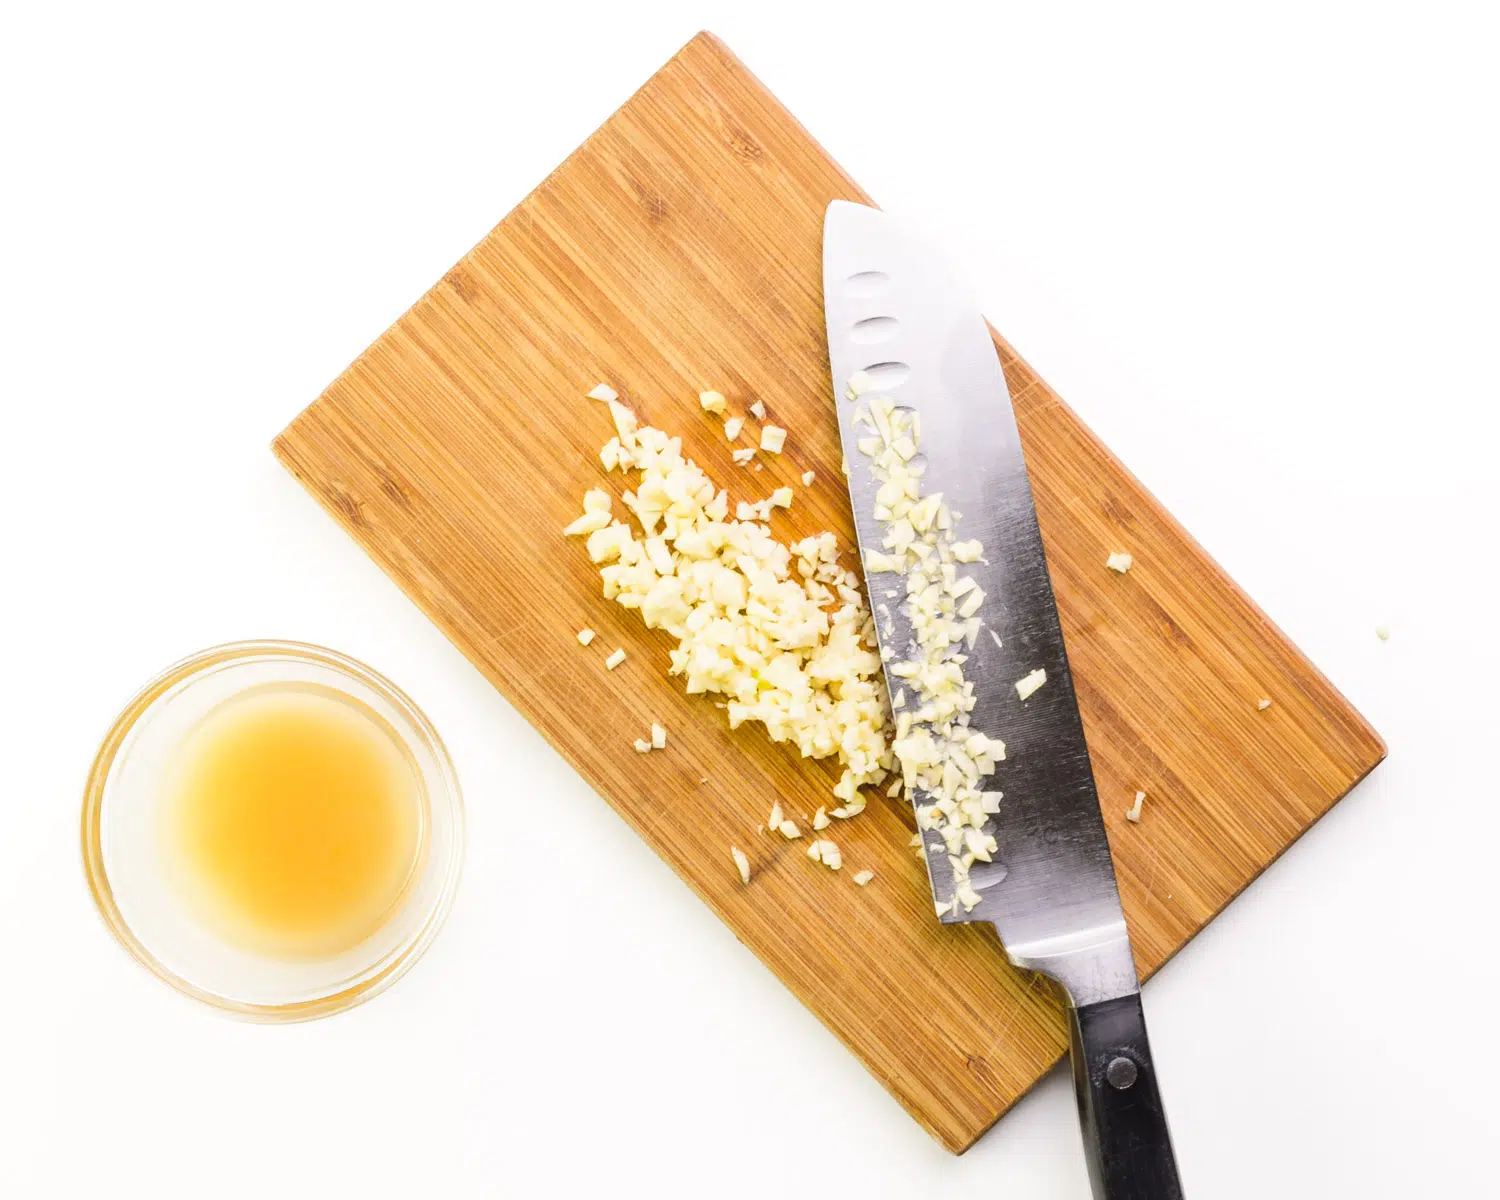 A chef's knife is on a cutting board with minced garlic. There is a bowl of lemon juice next to it.